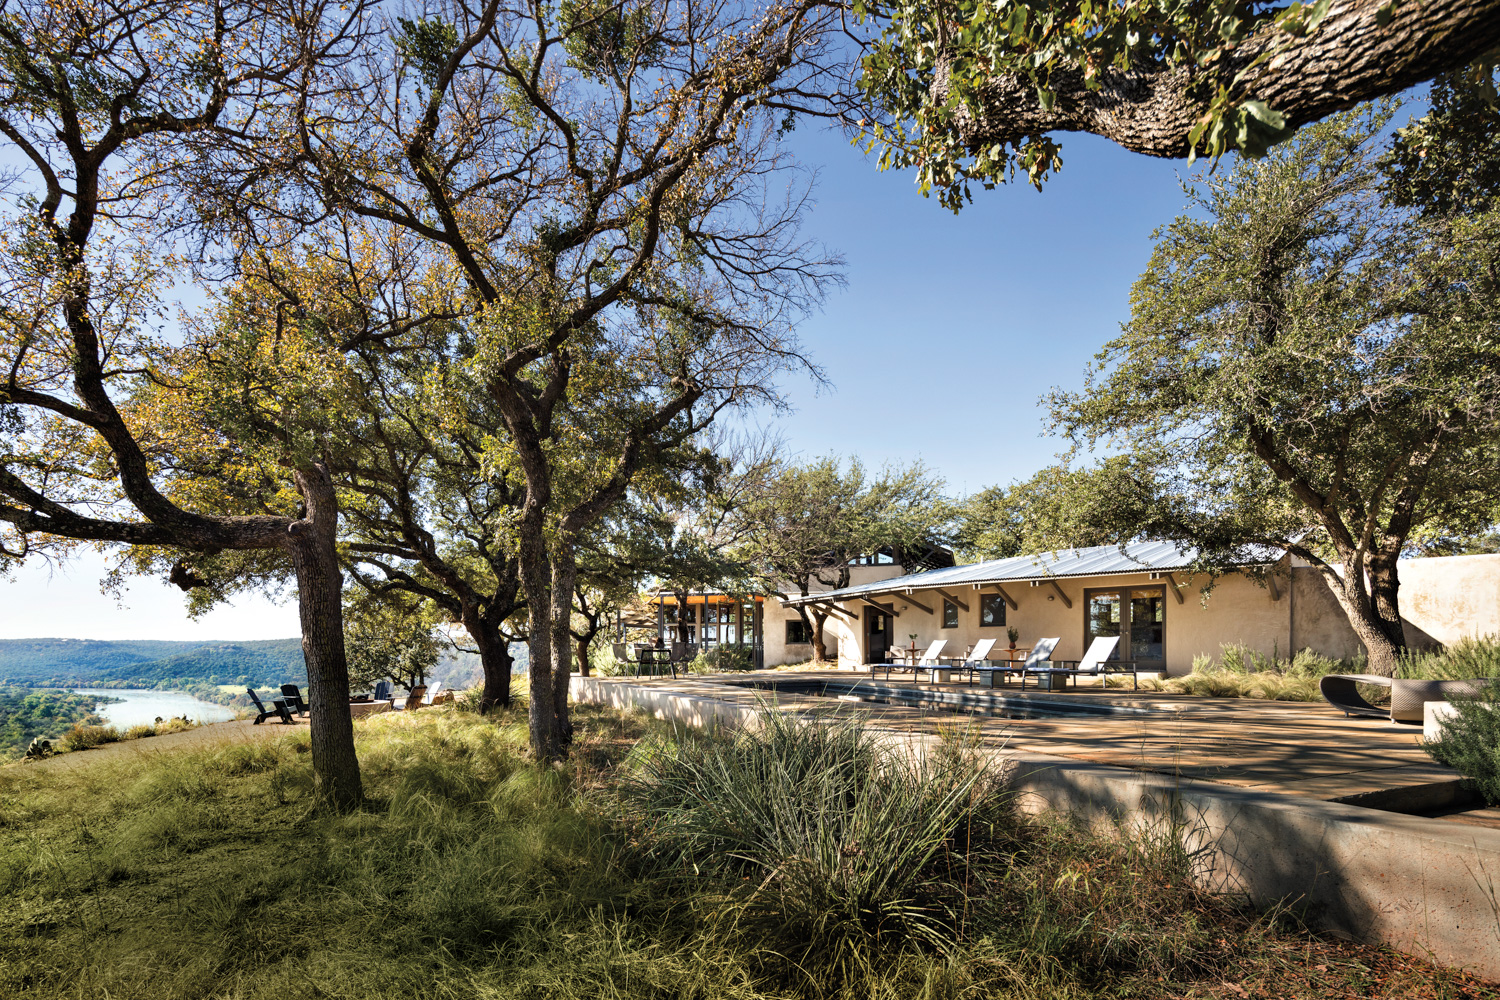 Kick Up Your Feet At This Texas Retreat With Stunning River Views